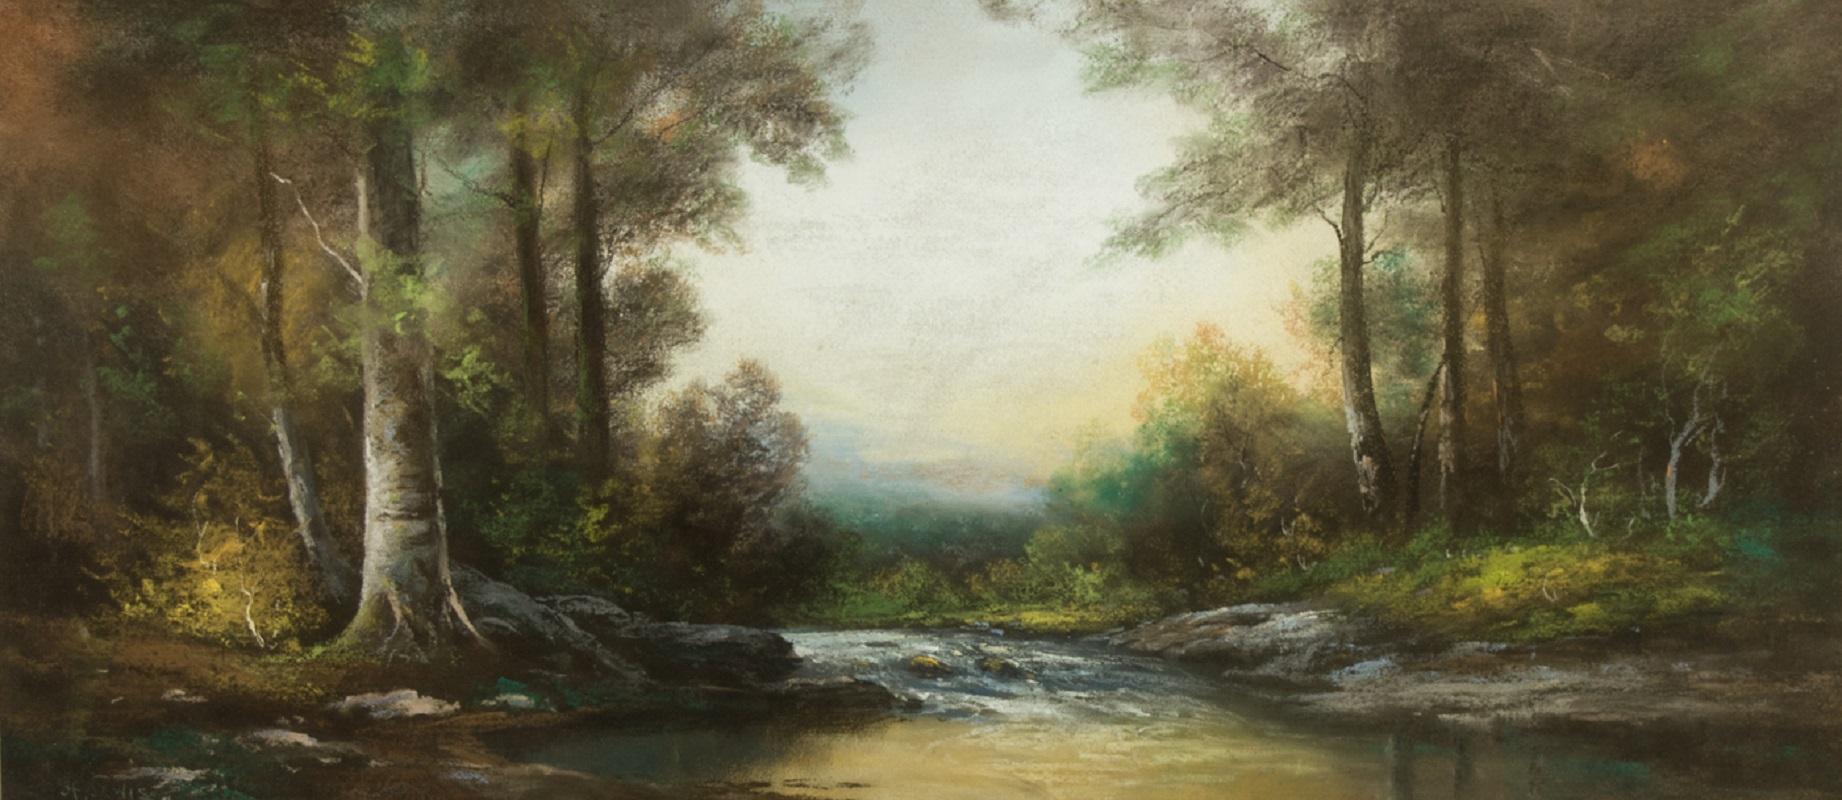 H. Lewis - Signed Contemporary Pastel, River Through a Forest at Dusk - Art by Unknown